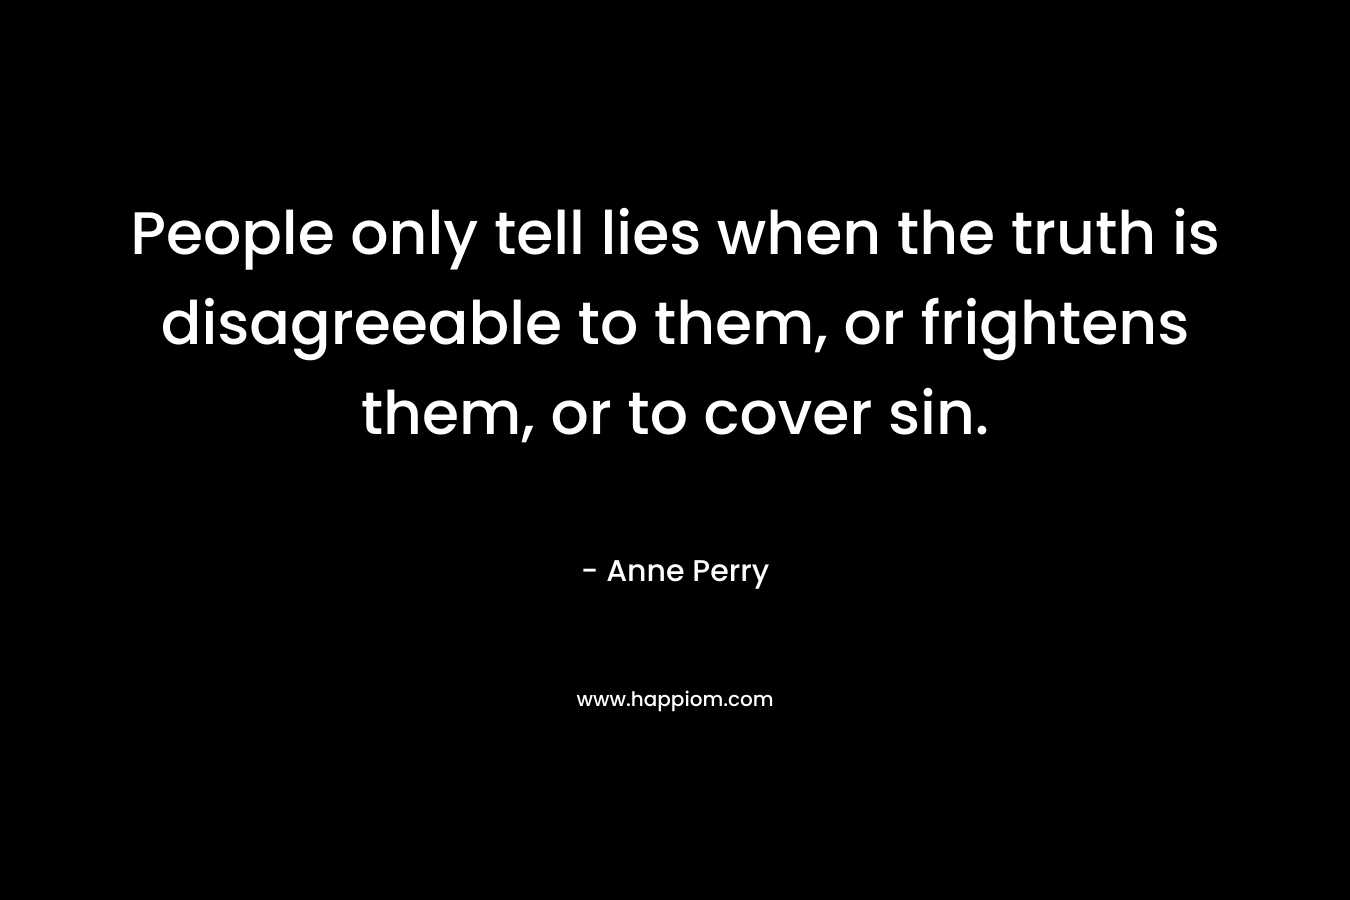 People only tell lies when the truth is disagreeable to them, or frightens them, or to cover sin. – Anne Perry